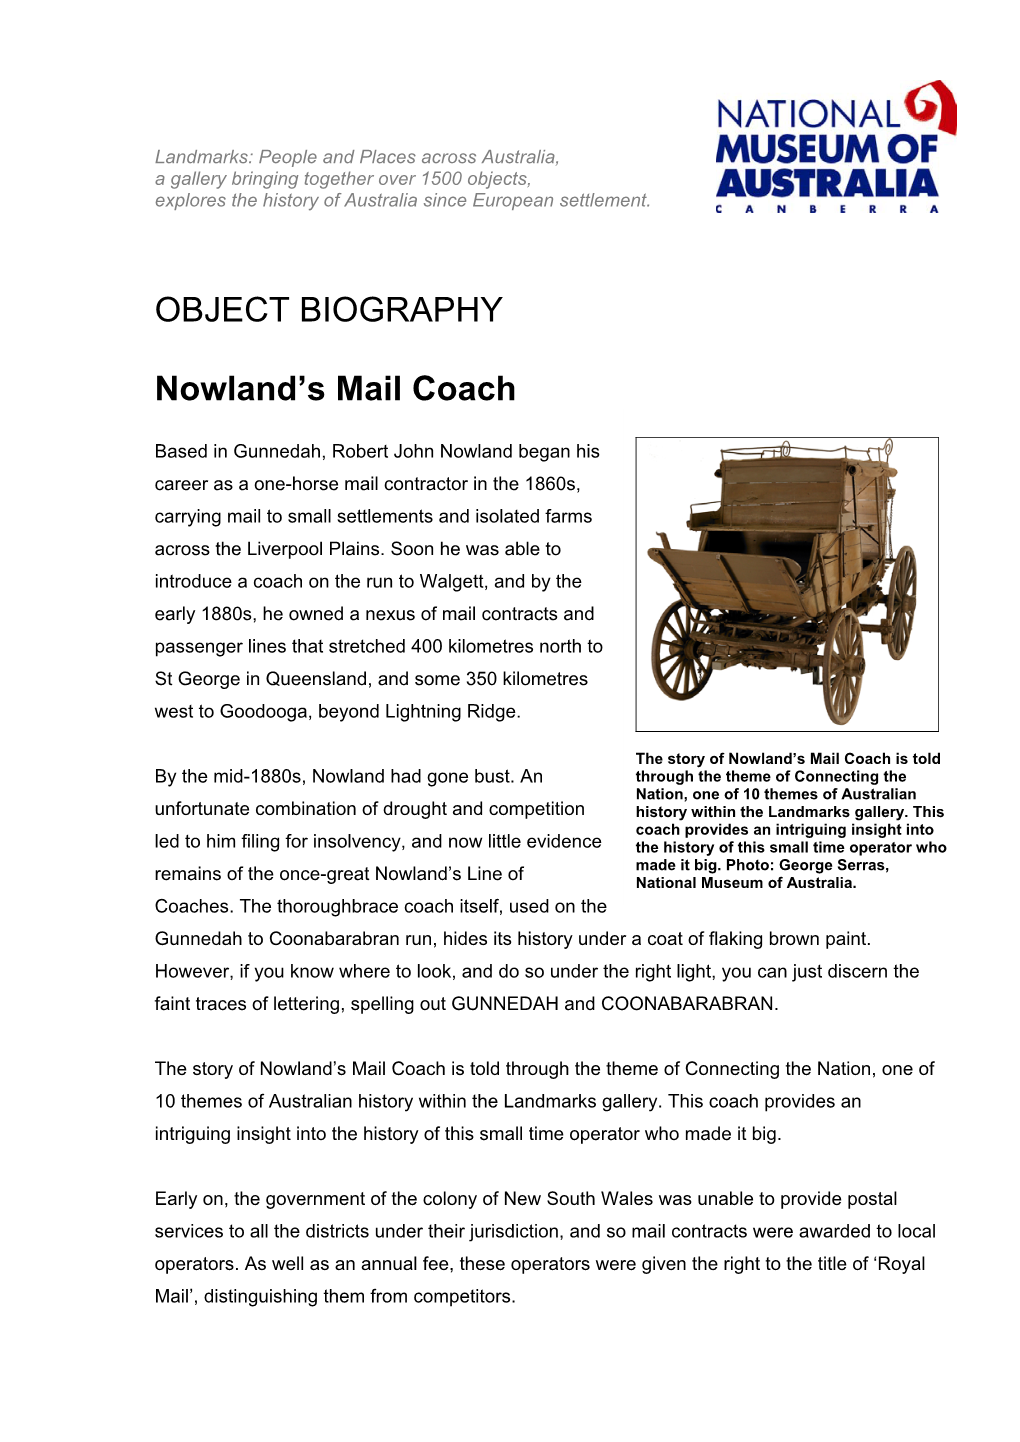 OBJECT BIOGRAPHY Nowland's Mail Coach